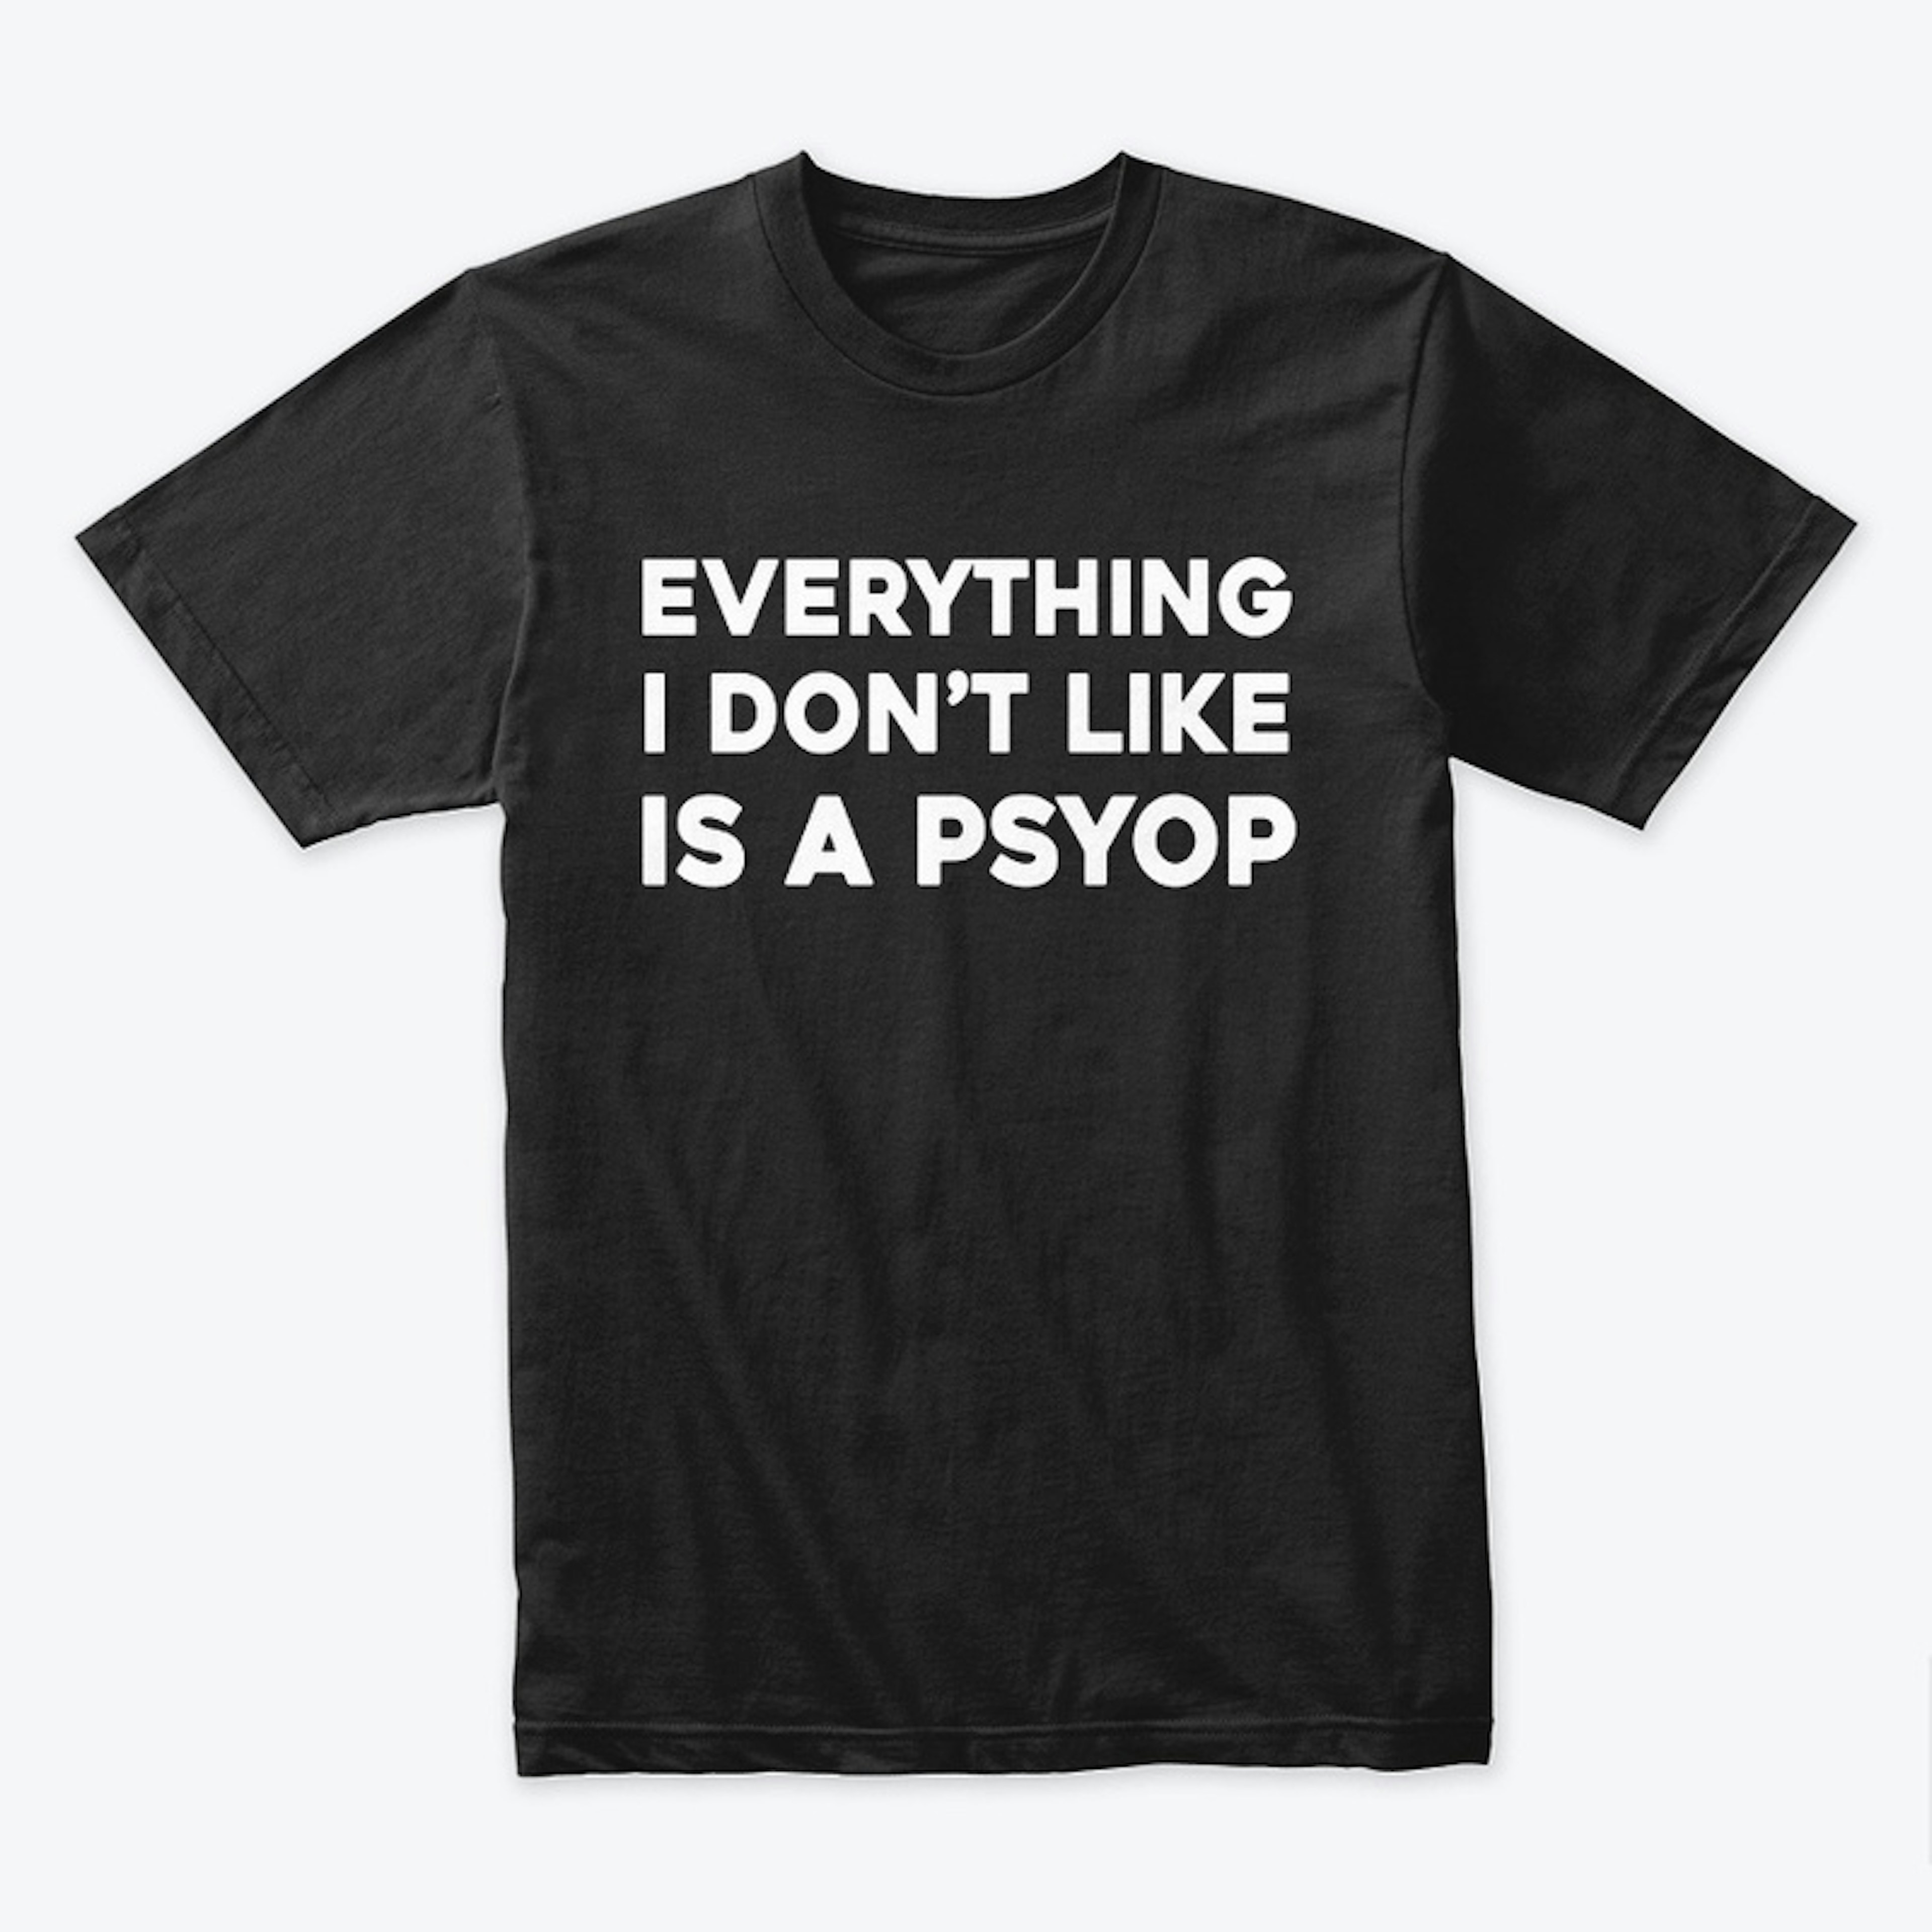 Everything I don’t like is a psyop